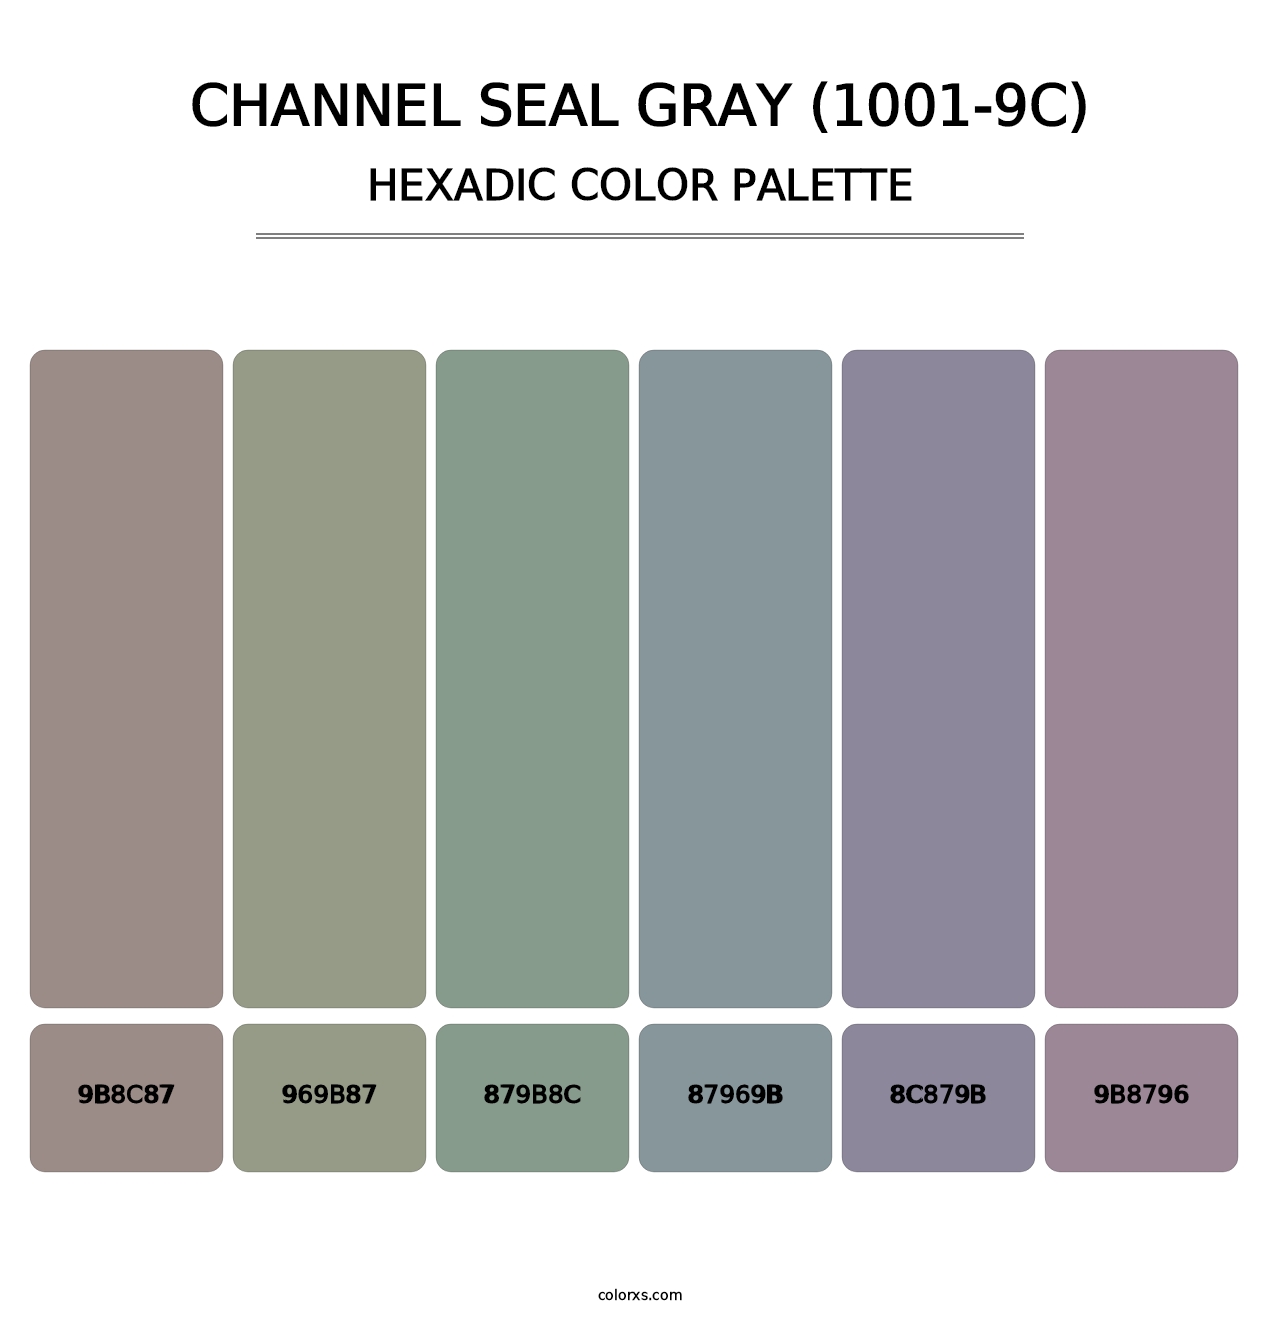 Channel Seal Gray (1001-9C) - Hexadic Color Palette